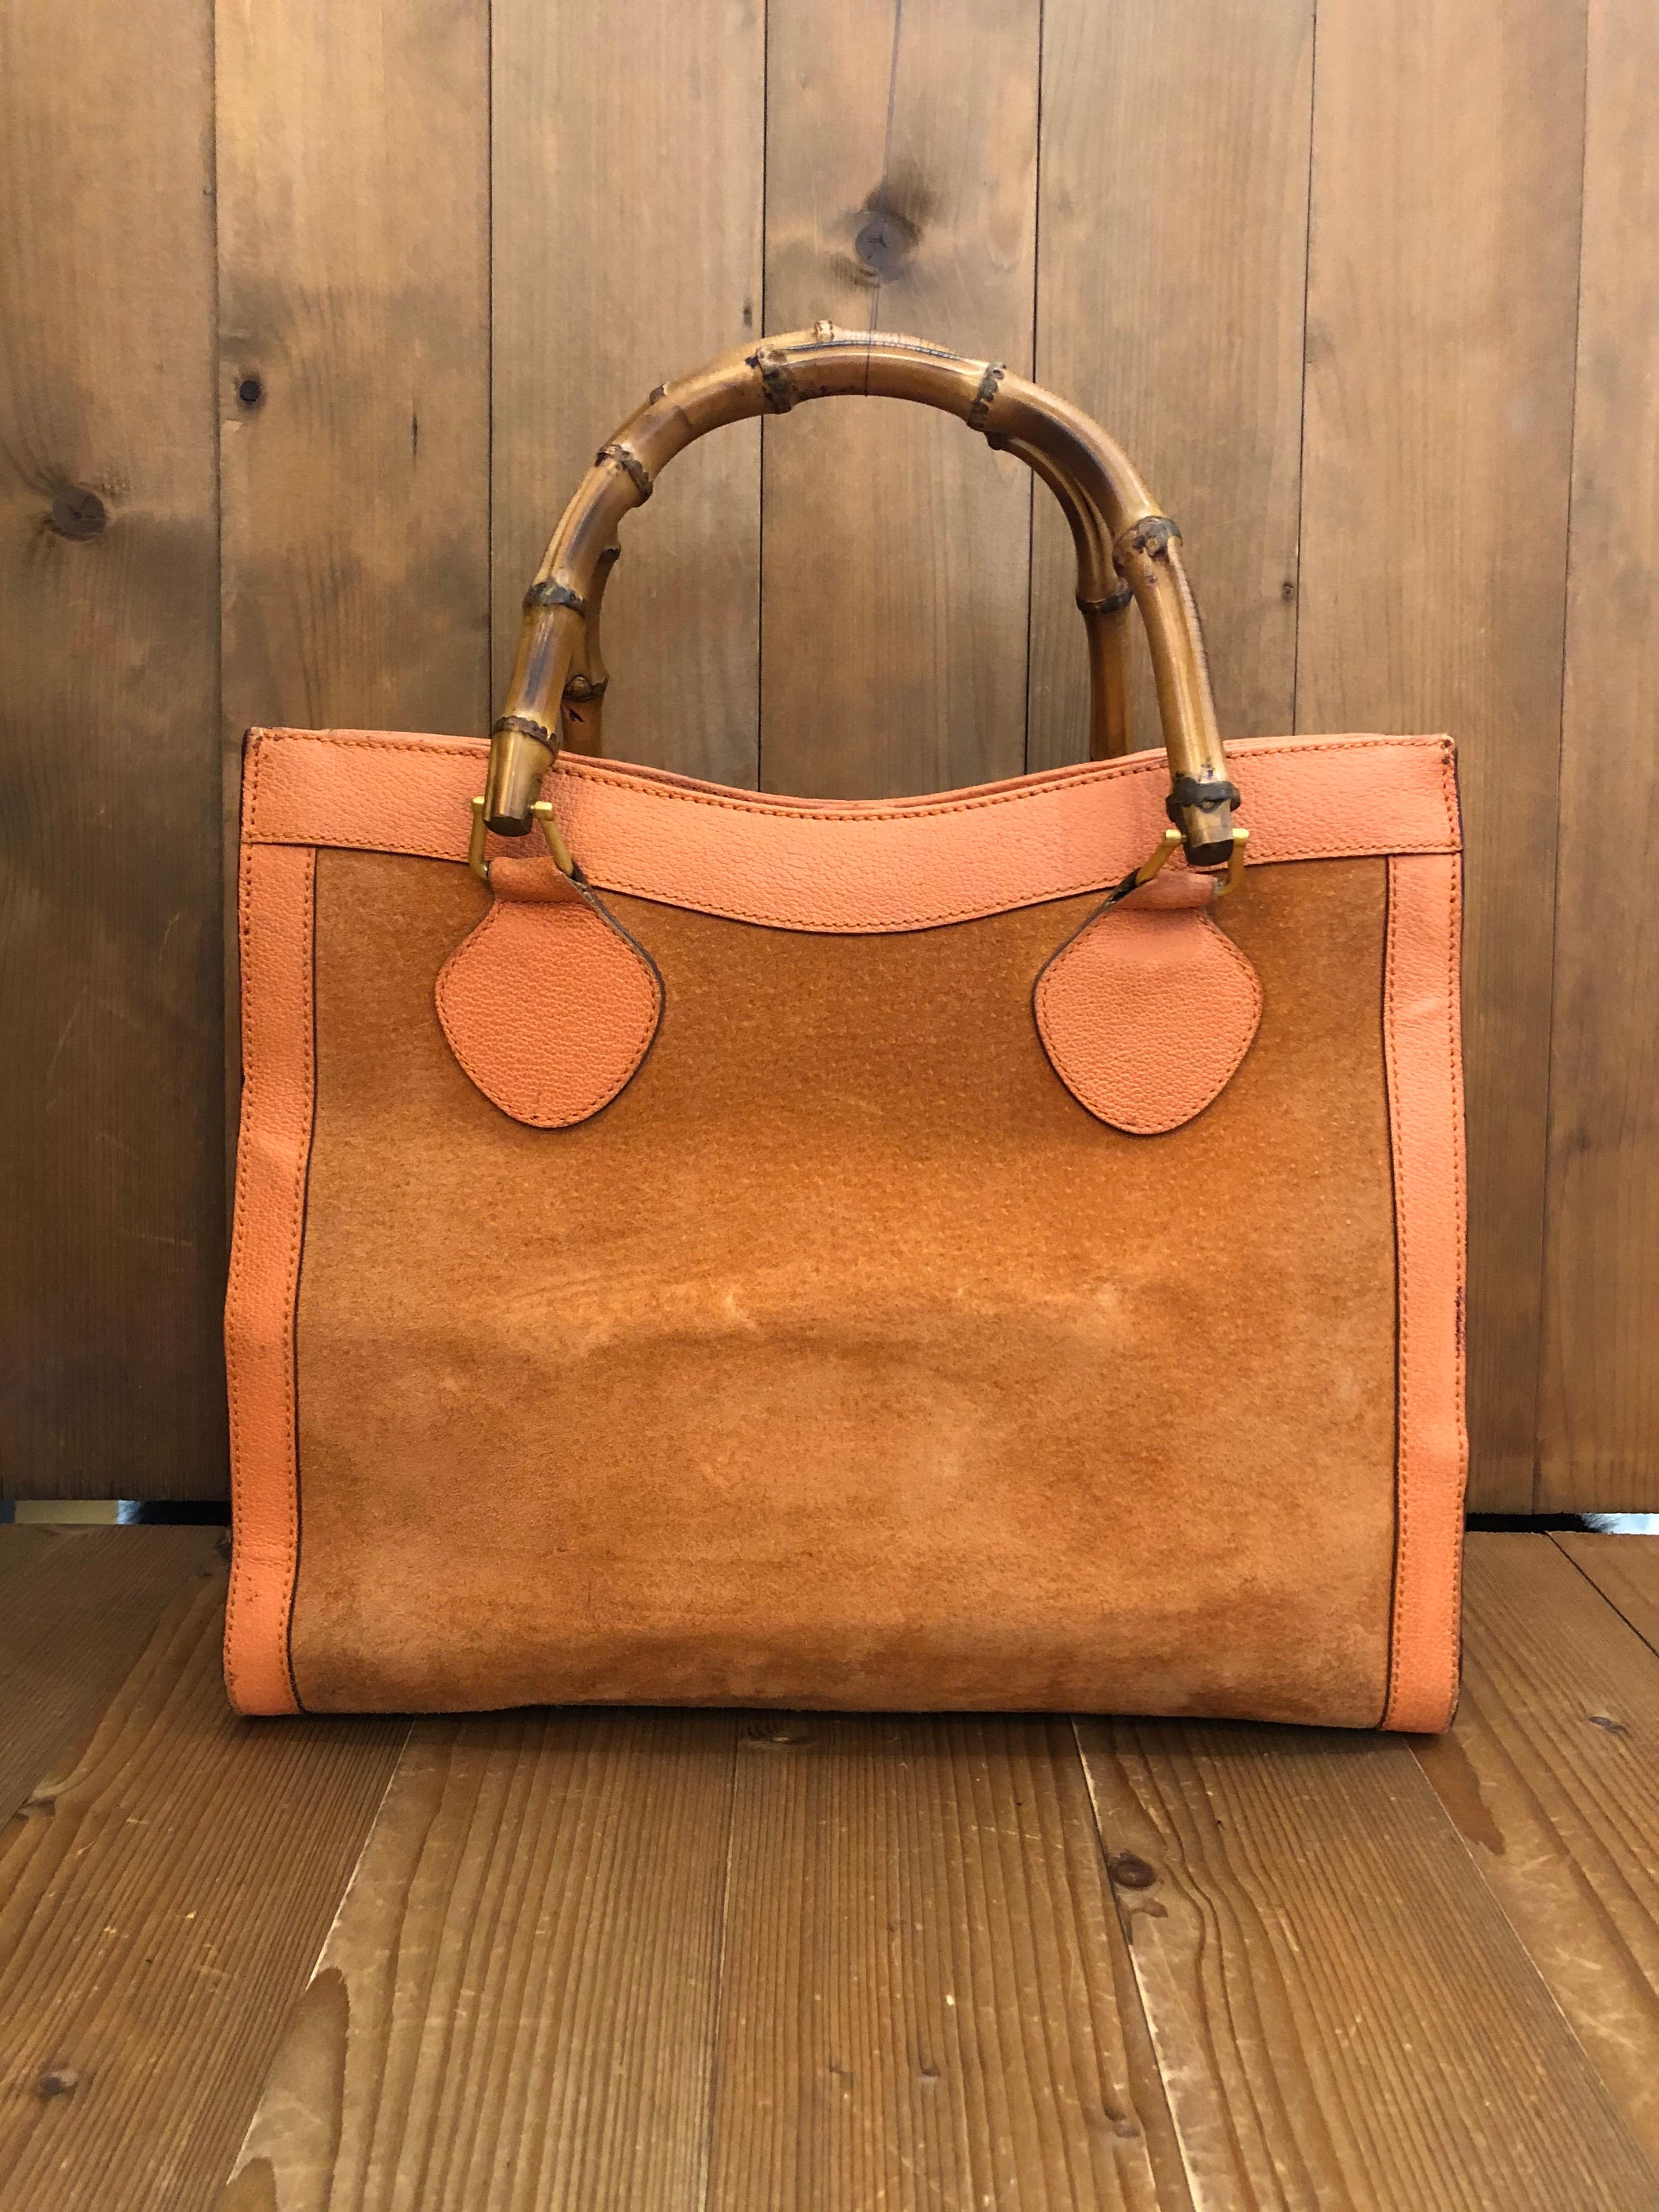 1990s Gucci bamboo tote in orange suede and leather featuring two main open compartments and one middle zip compartments with 1 interior zip pocket. Made in Italy. Measures 13 x 11 x 5.5 inches handle drop 5 inches. The Bamboo tote is one of